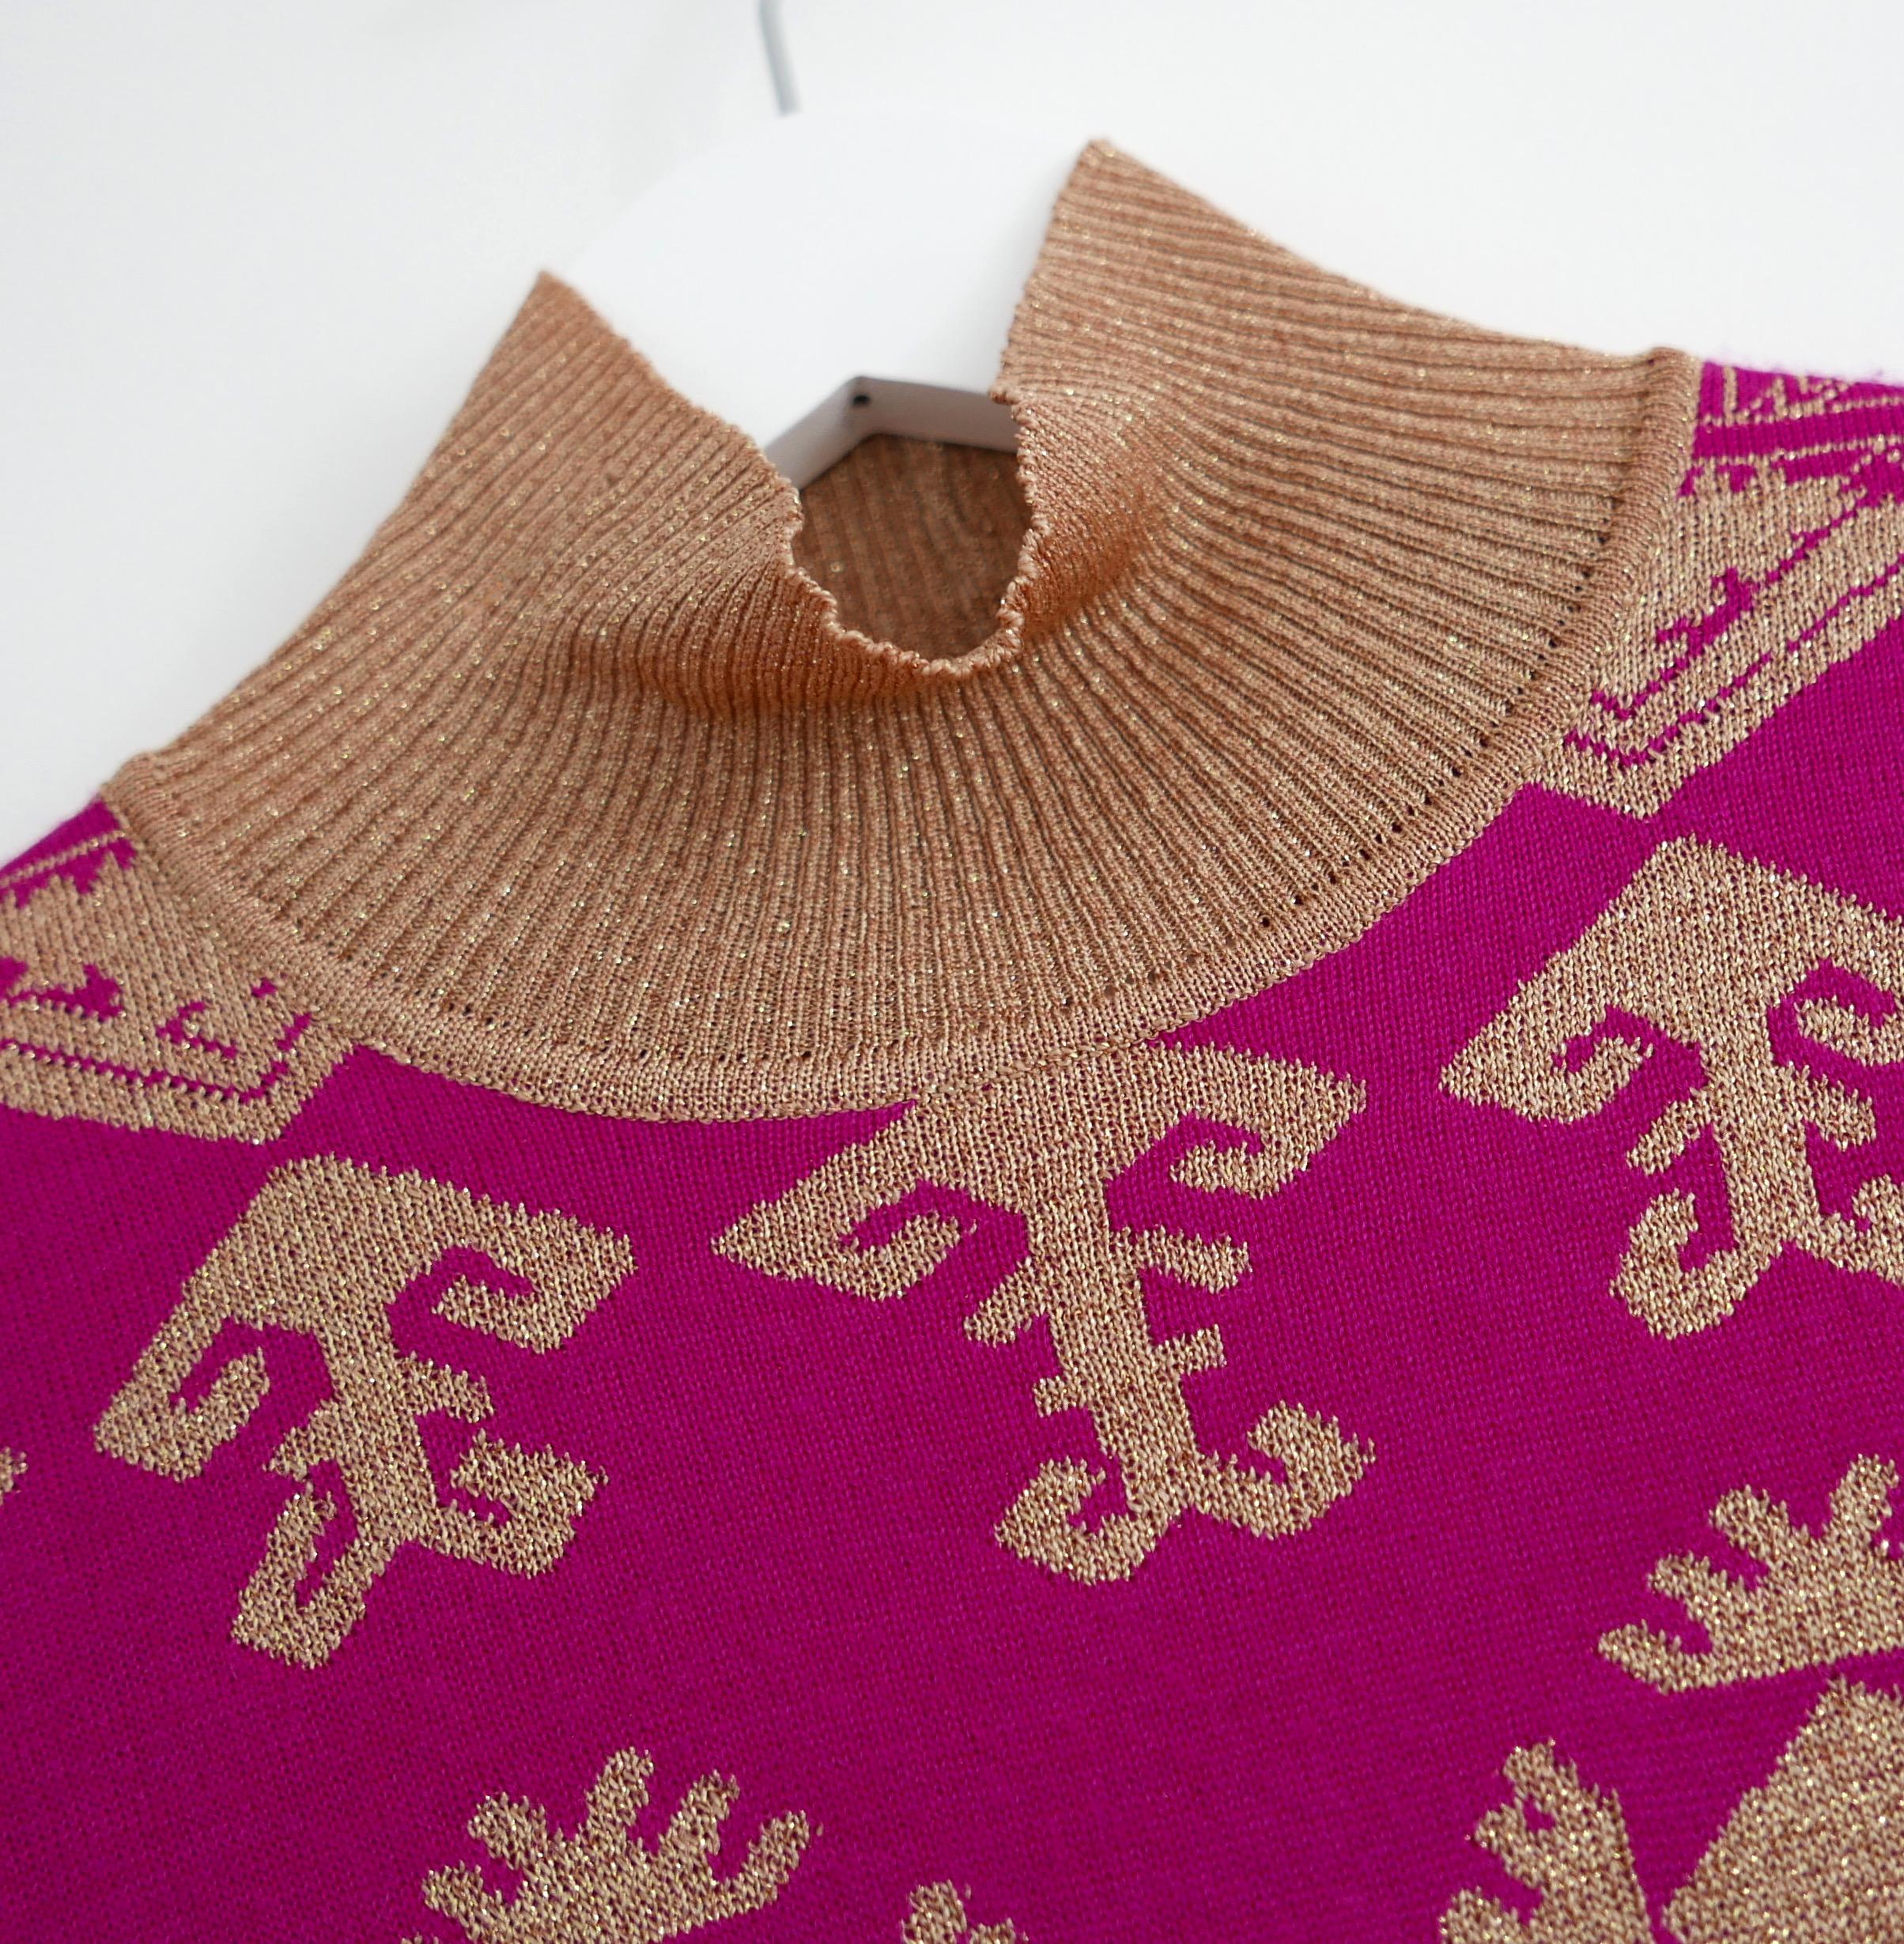 Stunning Christian Dior vintage sweater from John Galliano's Fall 2002 Collection. In excellent vintage condition and has been newly dry cleaned 

Made from ultra soft sunset inspired ombre acetate and wool mix knit with sparkling gold lurex Indian